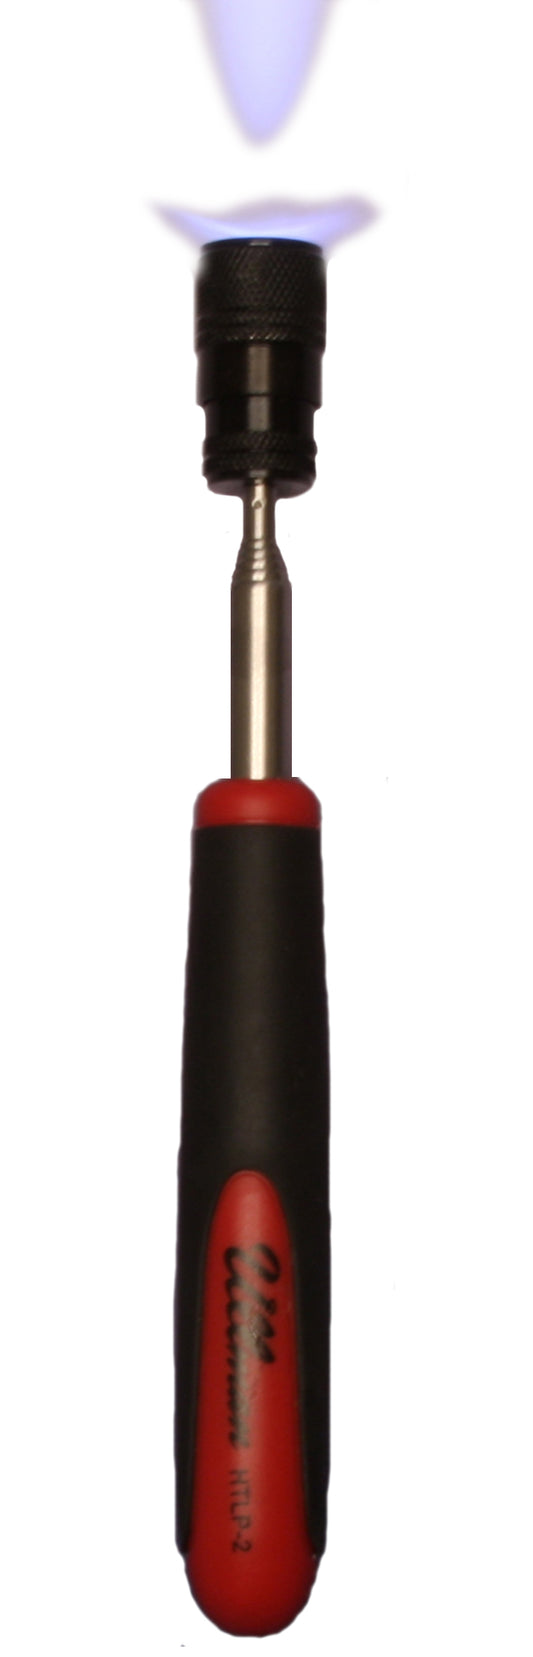 ULLMAN HTLP-2 Telescopic Magnetic Pick-Up Tool with POWERCAP® and LED Light, HTLP2